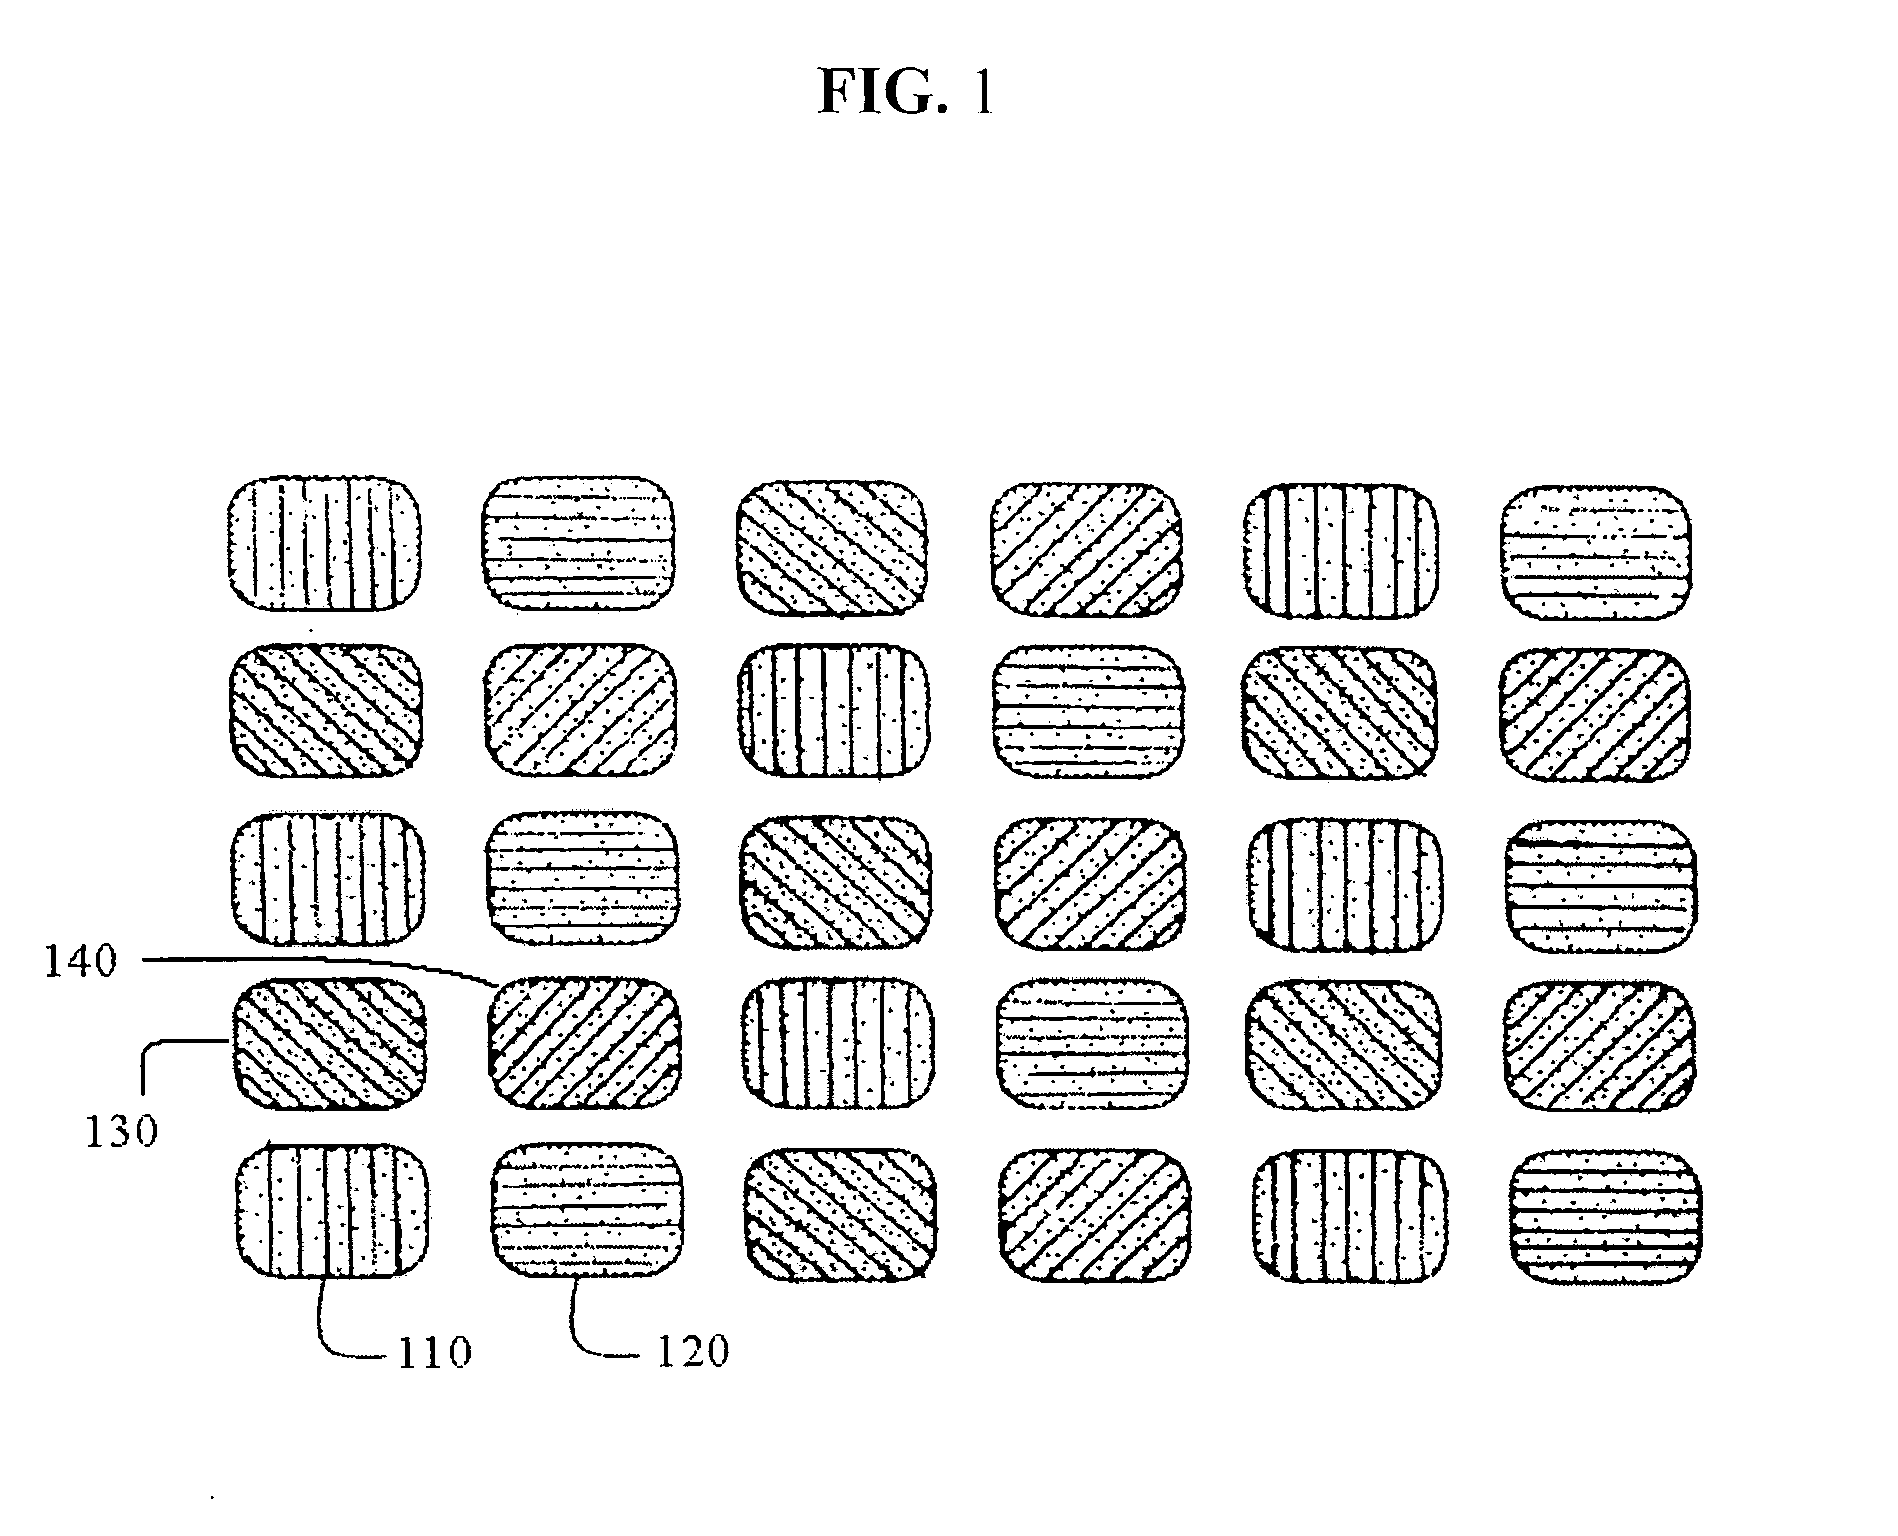 Systems, methods and devices for multispectral imaging and non-linear filtering of vector valued data